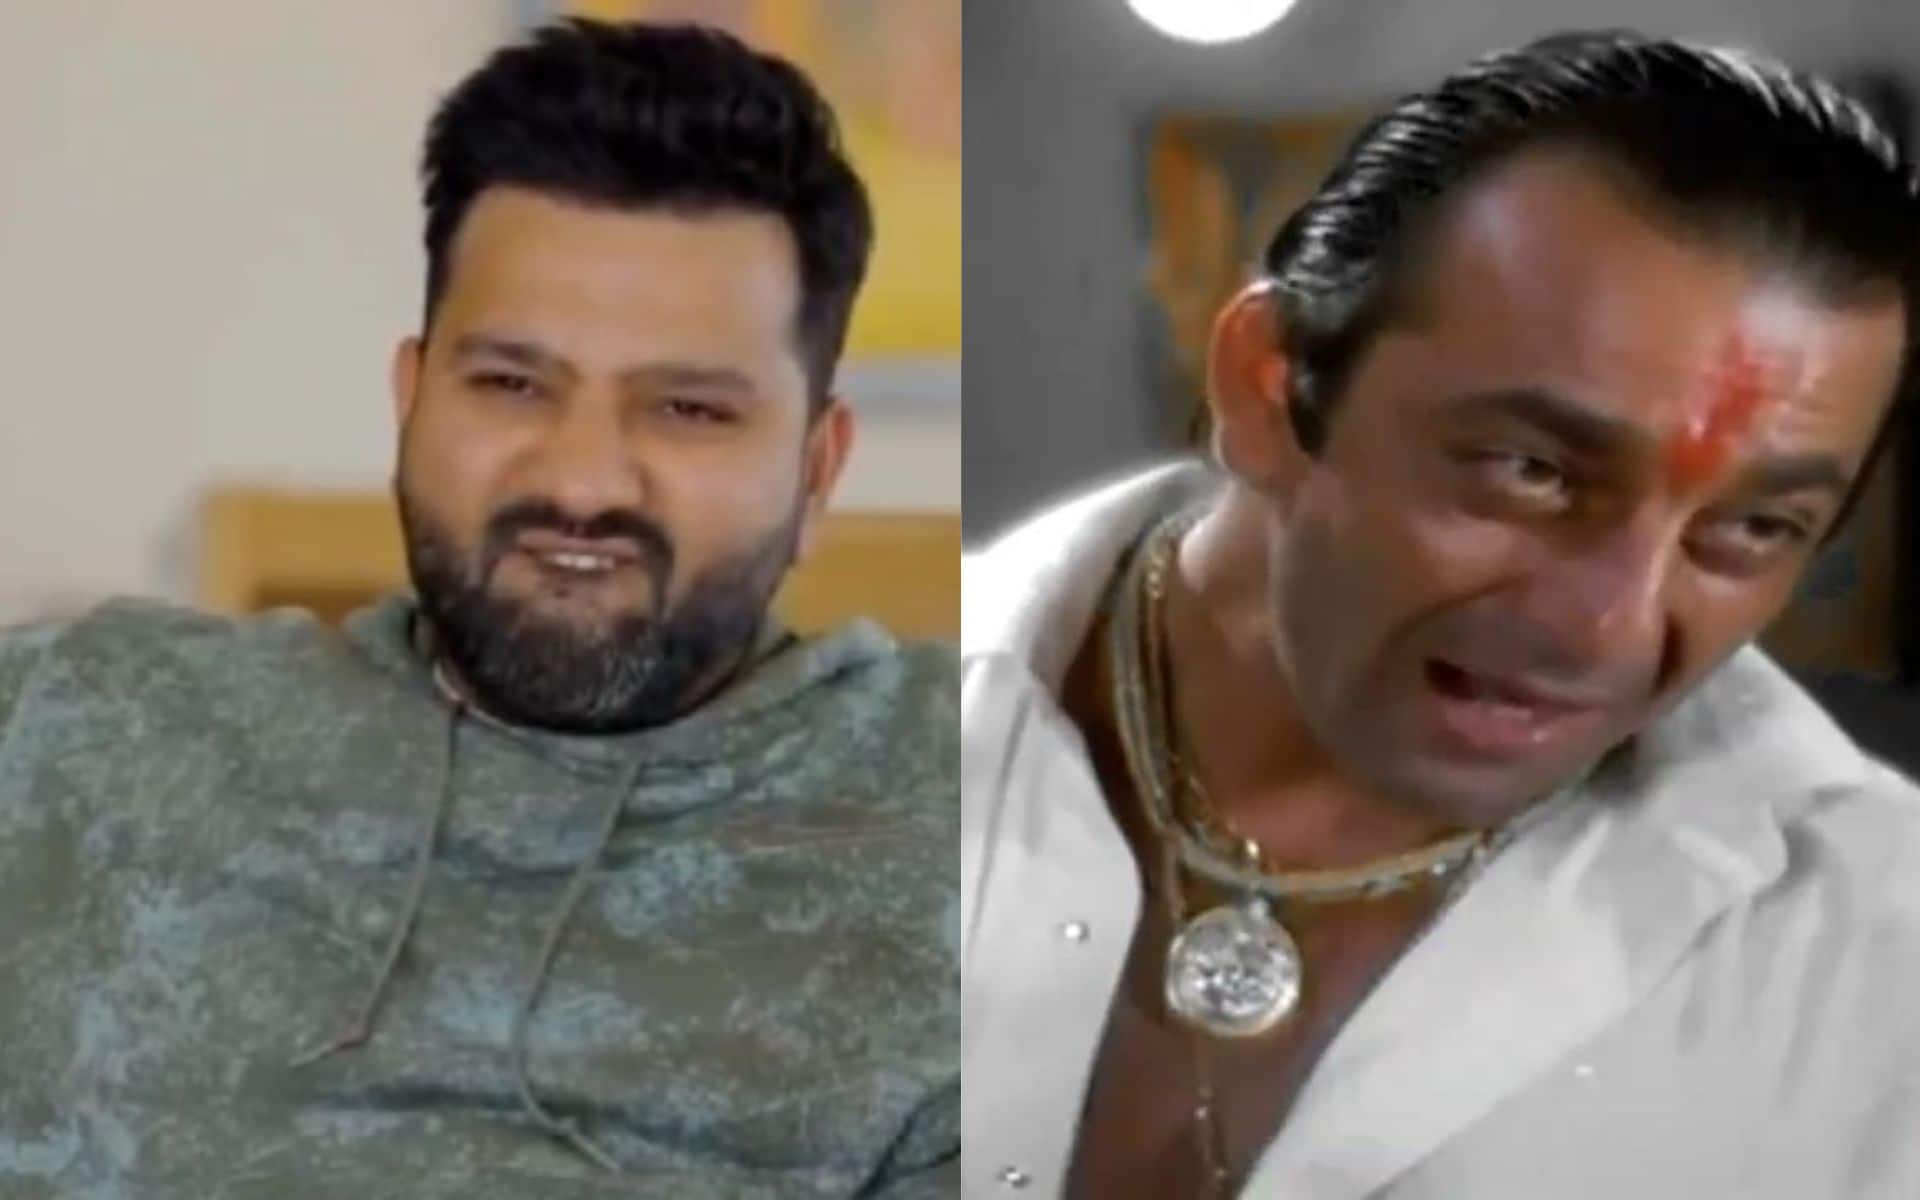 Rohit Sharma delighted fans with Sanjay Dutt impersonation (x.com)